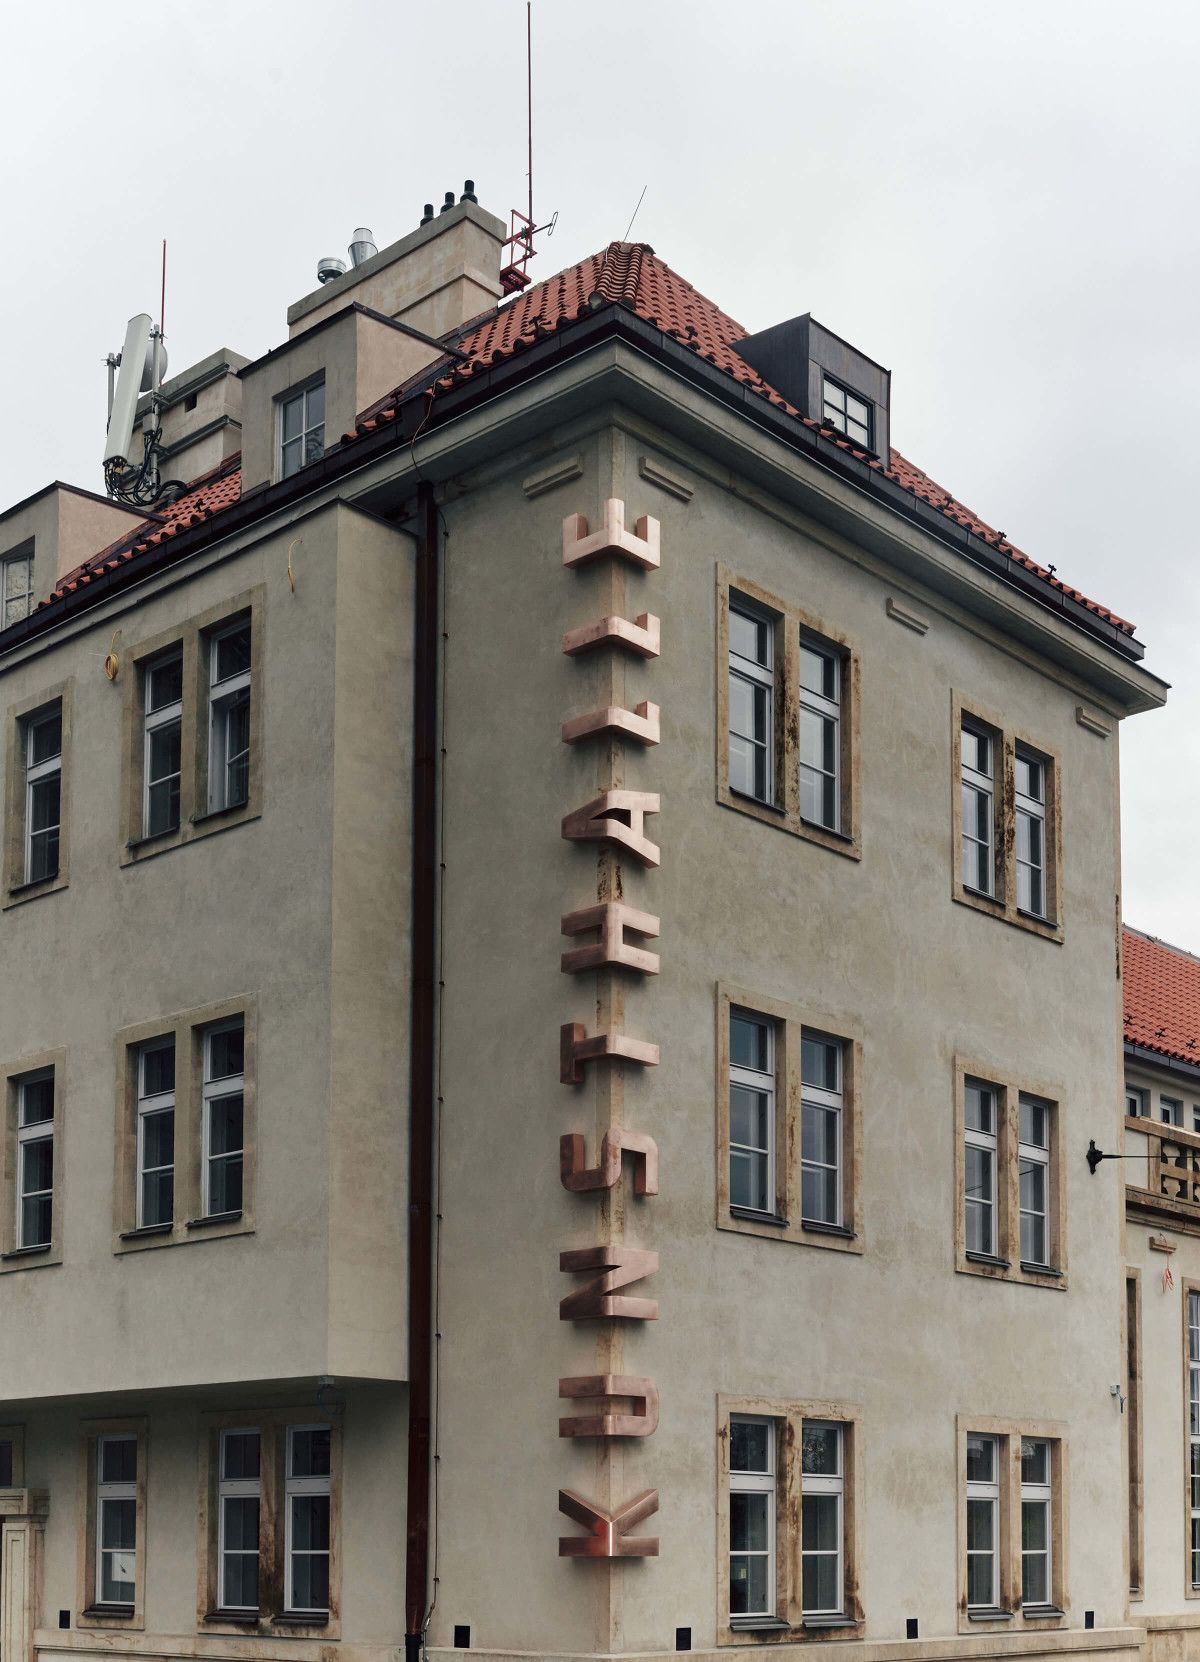 Bronz letters embrace the Kunsthalle building in Praha